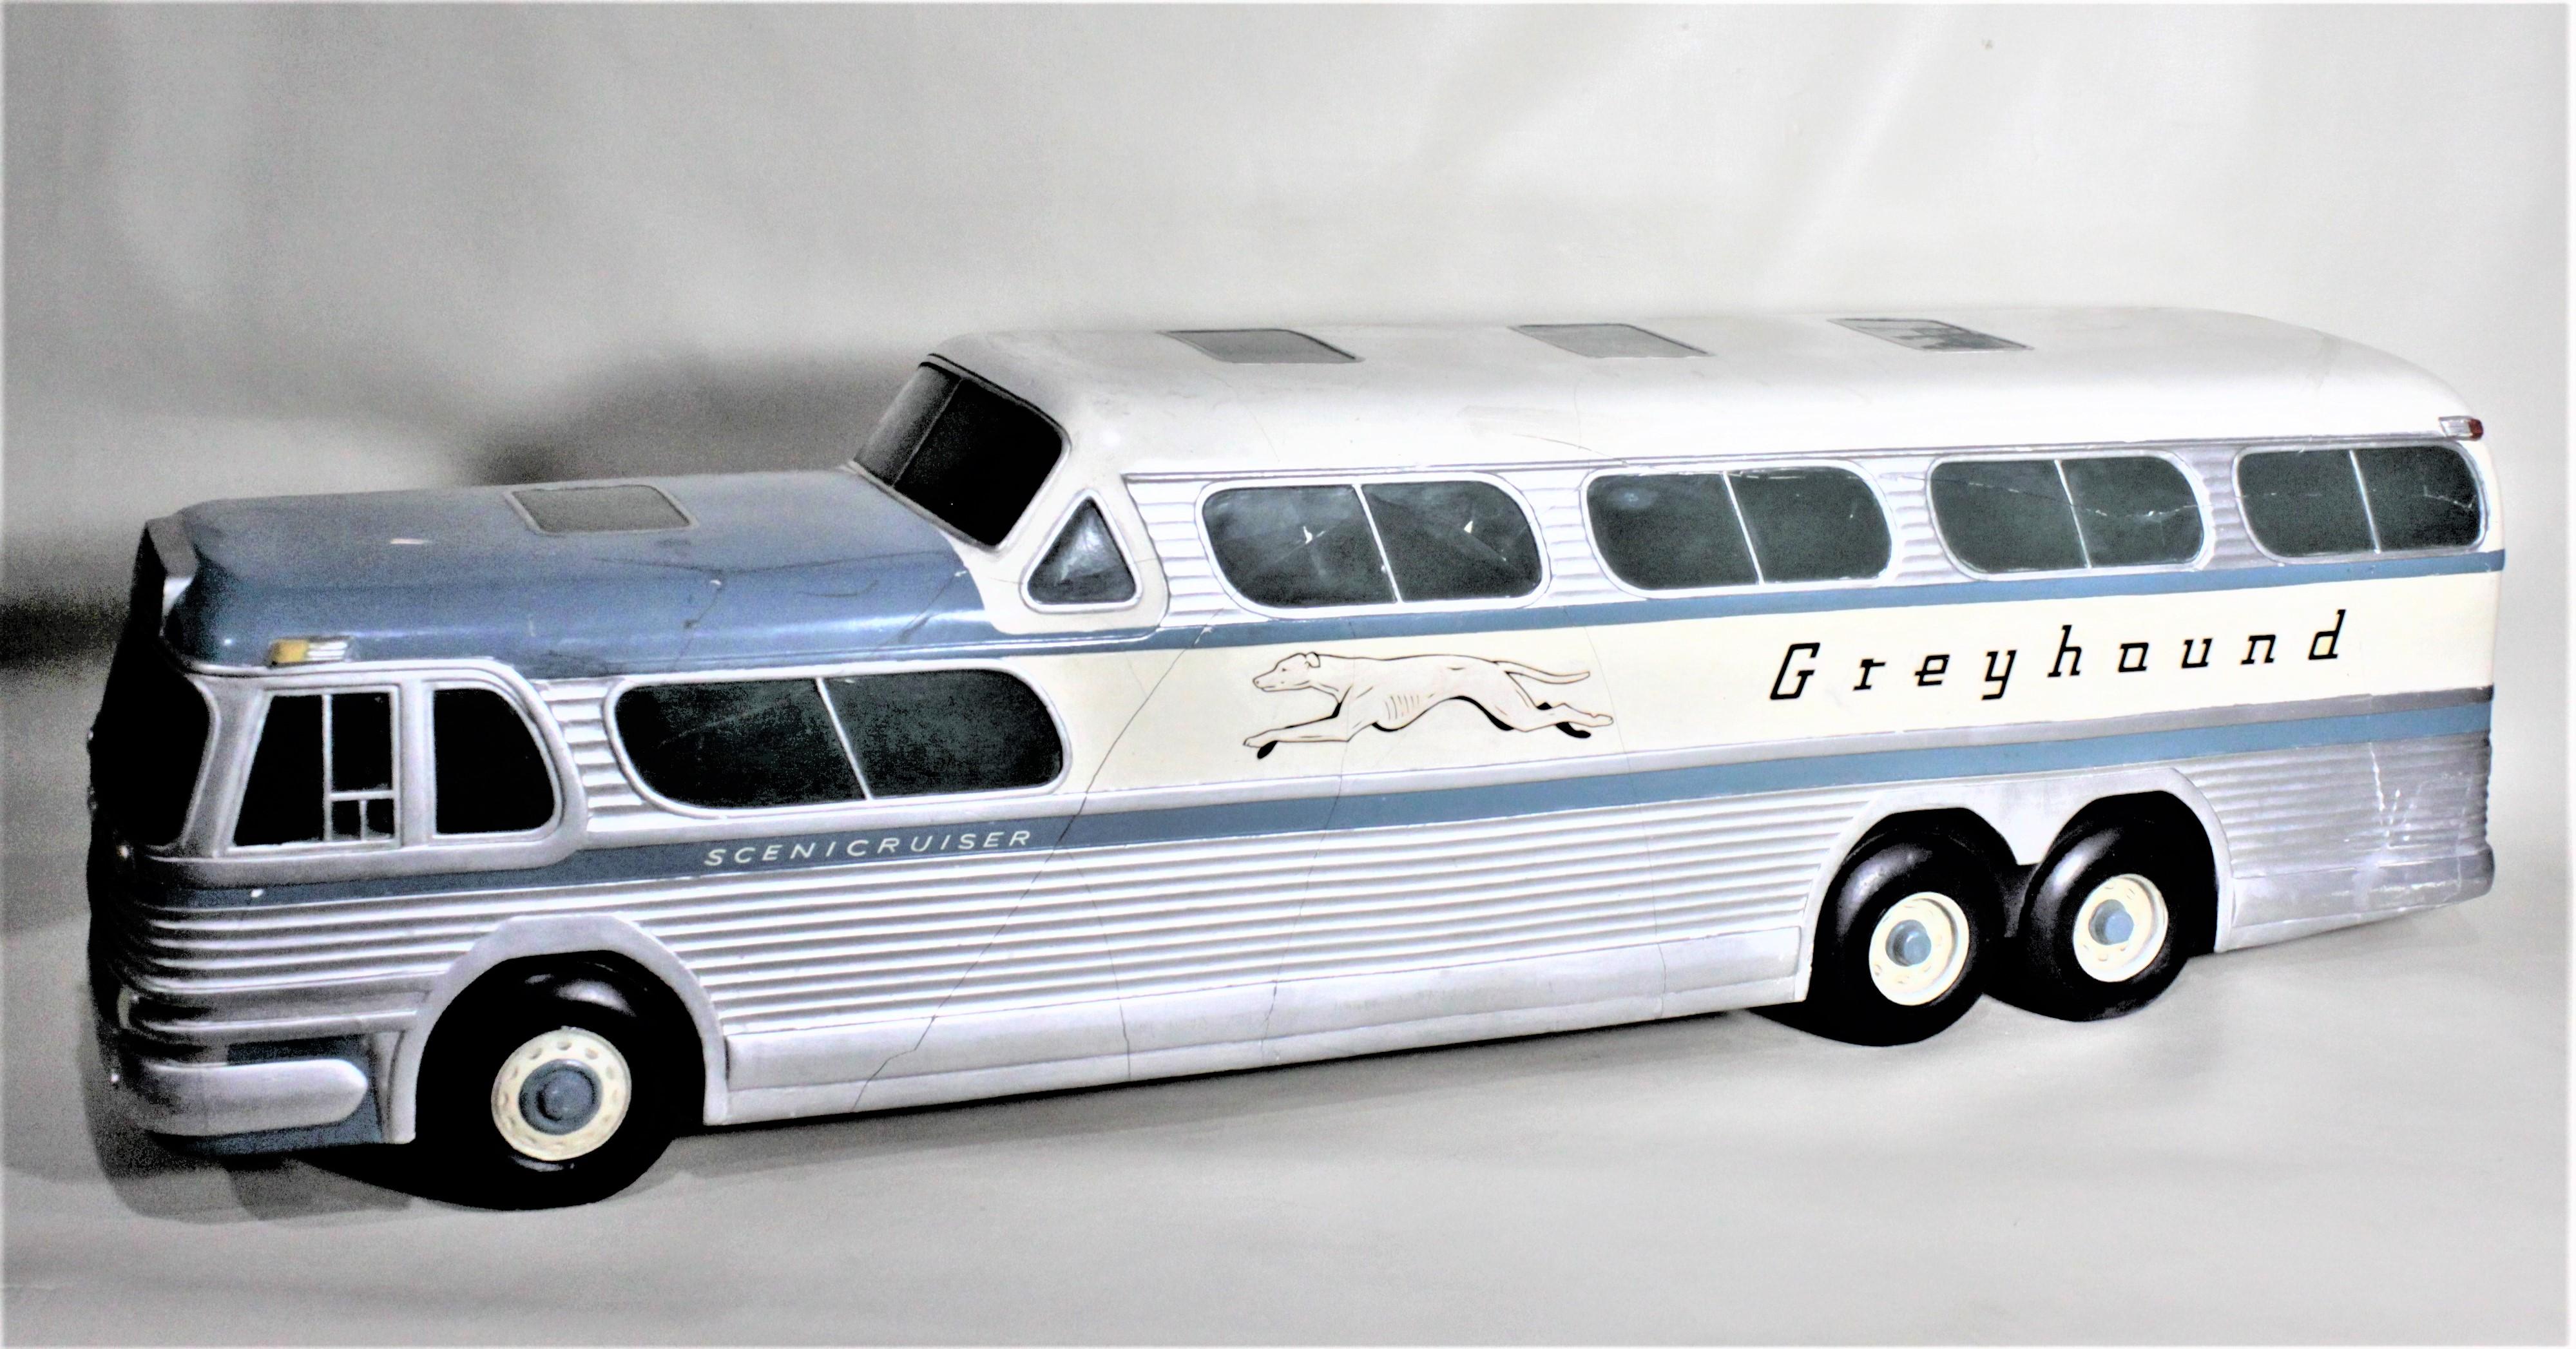 This large and substantial molded plaster model of the iconic Mid-Century Modern Greyhound 'Scenicruiser' bus has no maker's marks, but presumed to be made in the United States in approximately 1955. These models were reported to be used as display